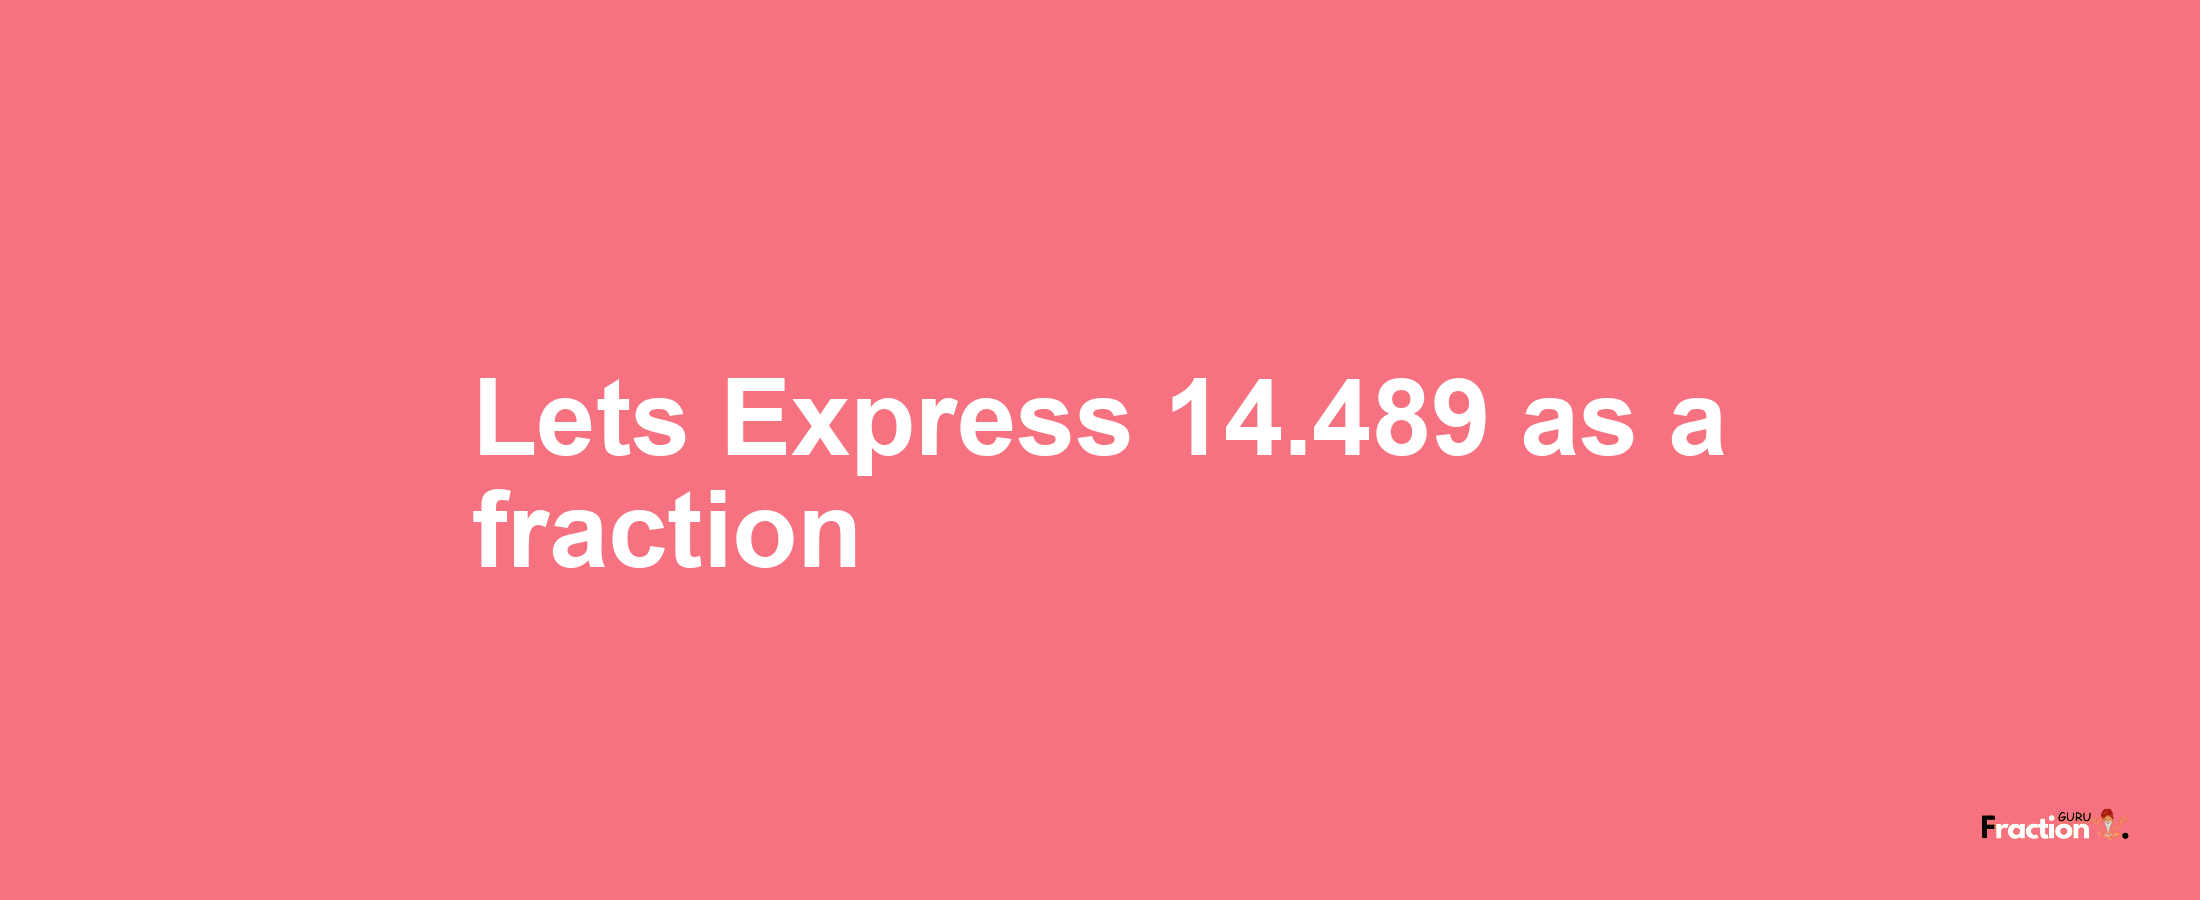 Lets Express 14.489 as afraction